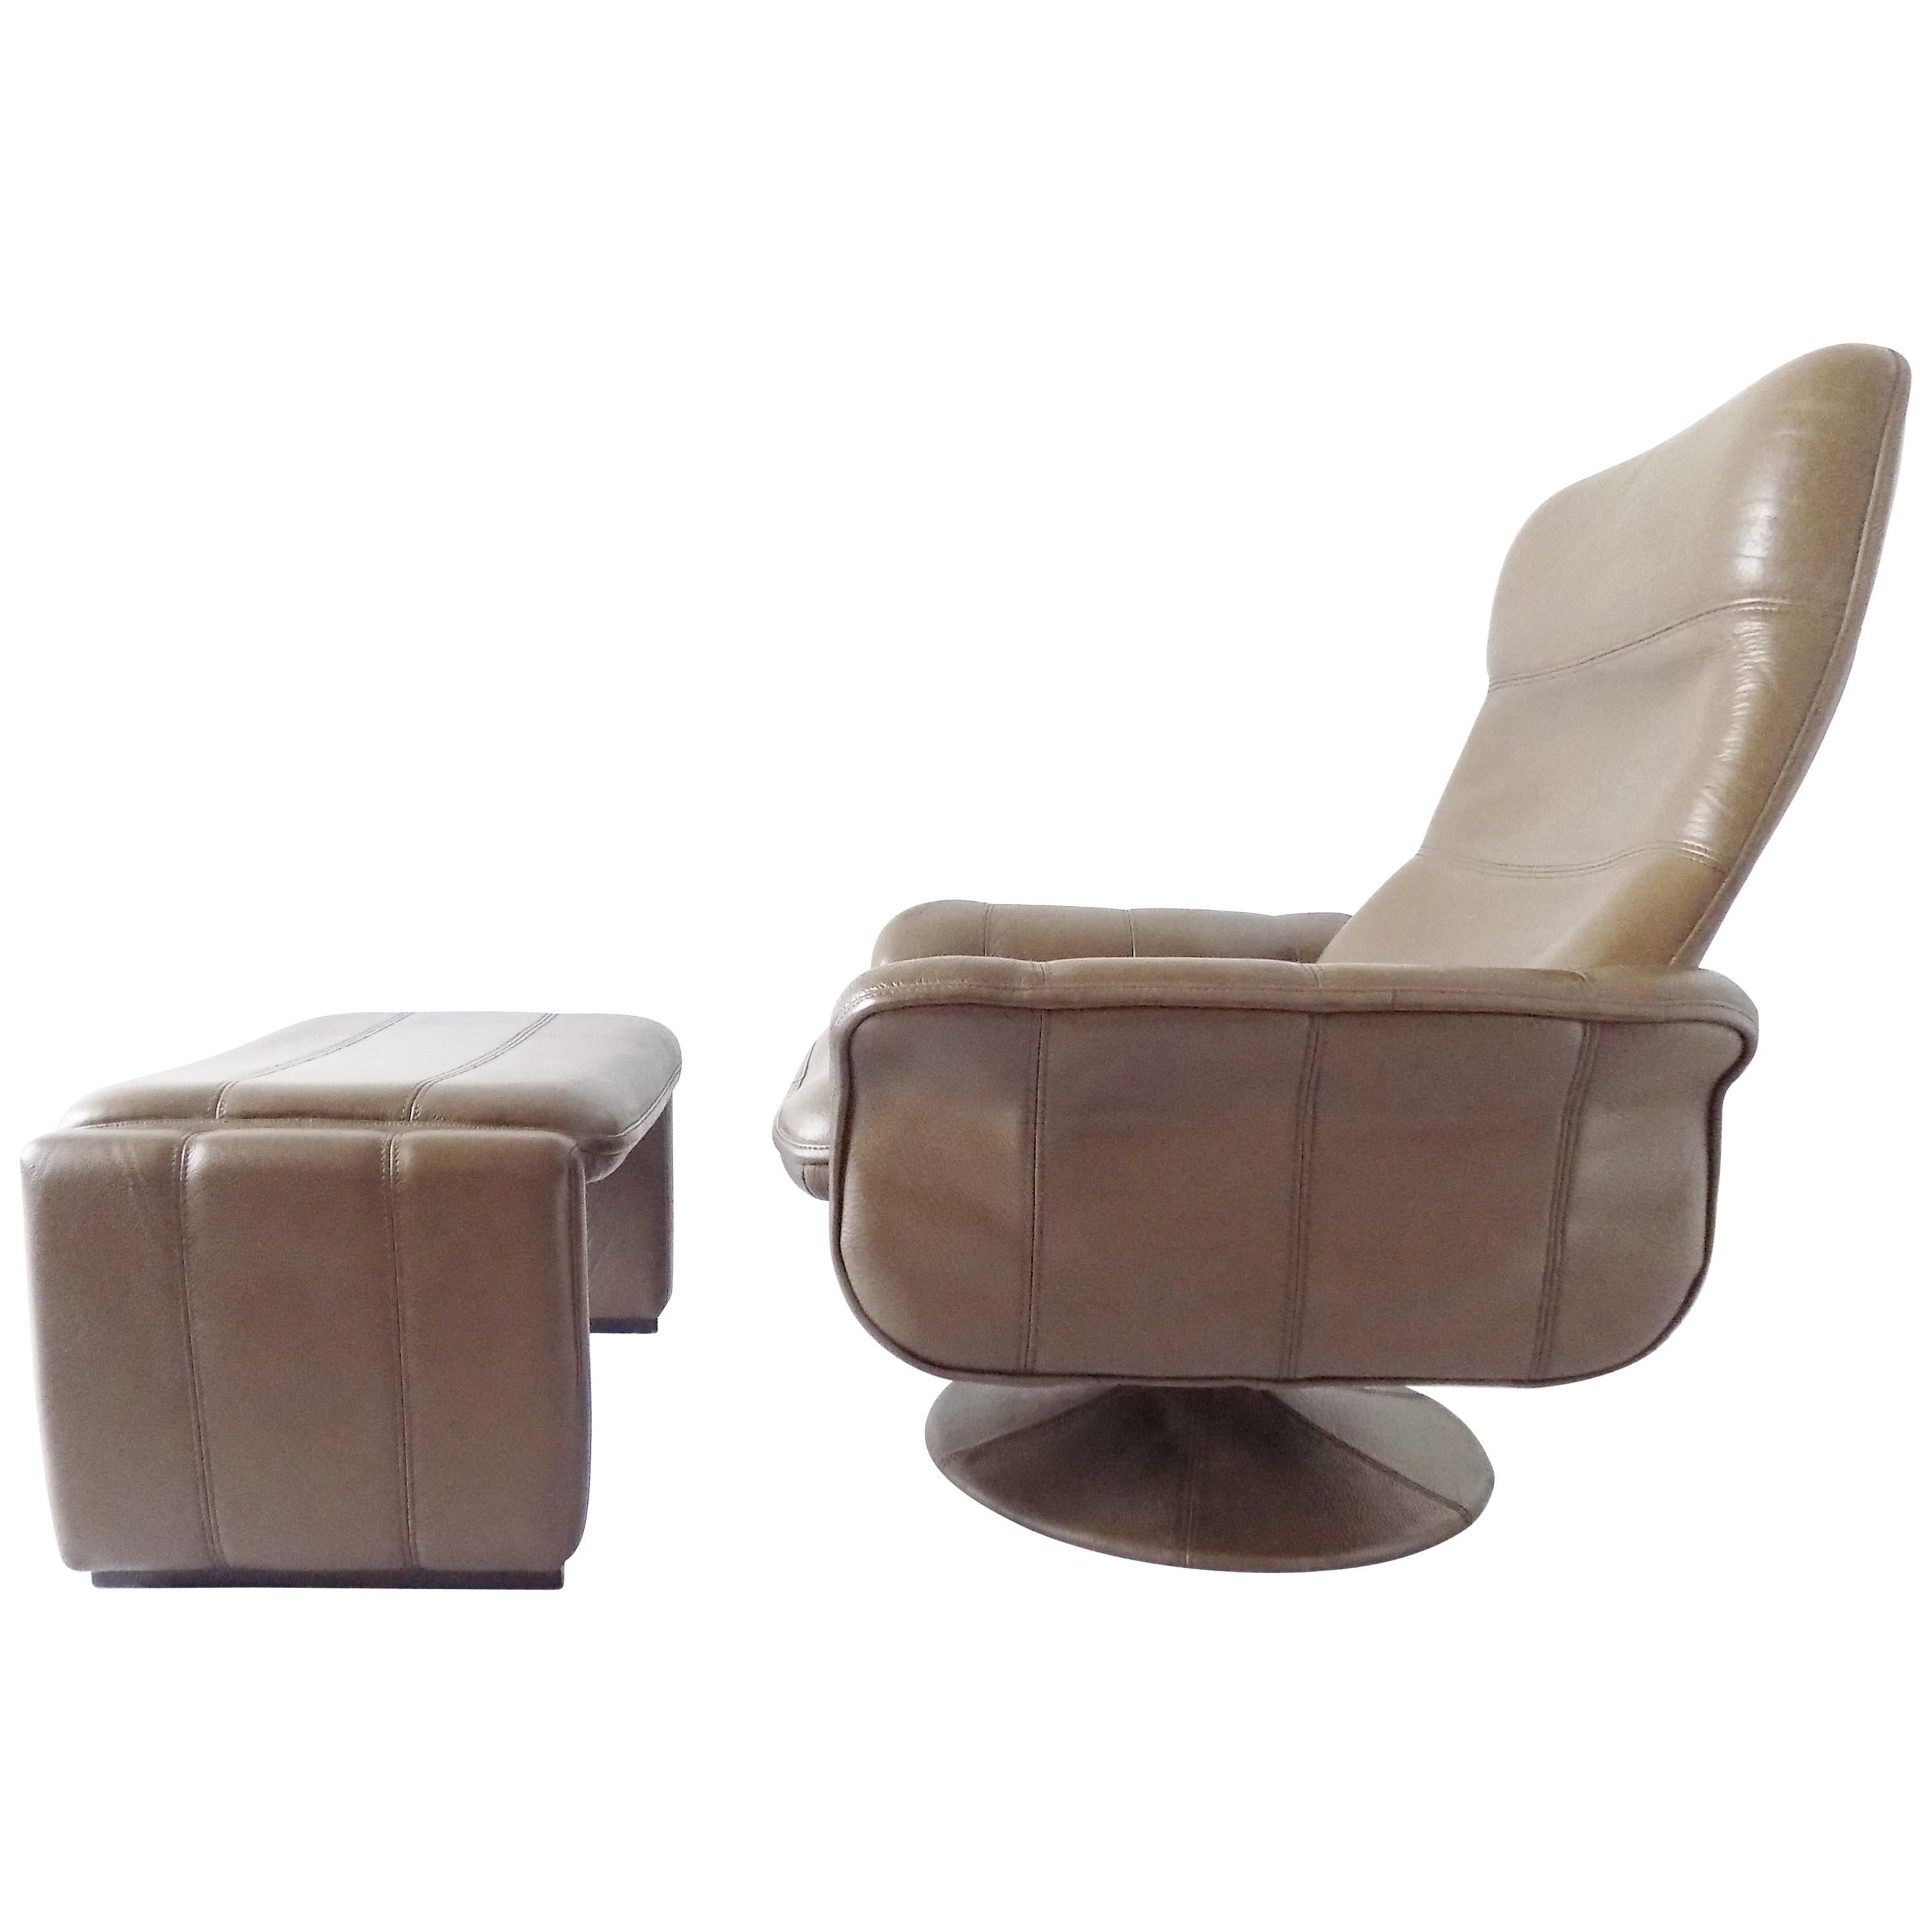 De Sede DS50 Tulip Lounge Chair with Ottoman, mid-century modern, Swiss, leather